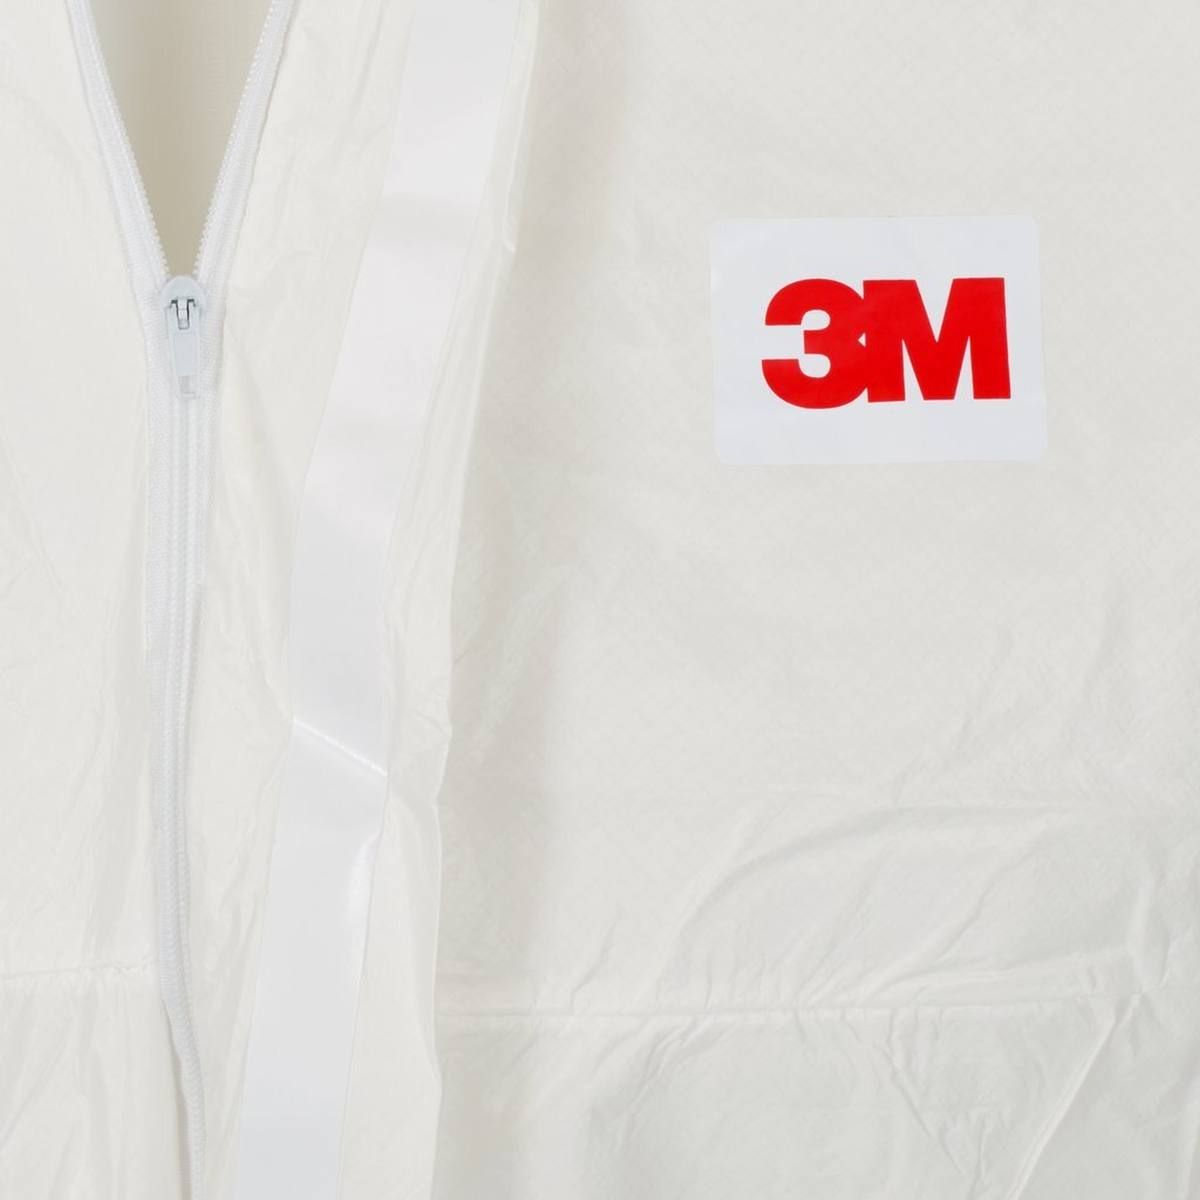 3M 4540 coverall, white blue, type 5/6, size L, robust, lint-free, reinforced seams, SMMMS material, breathable, detachable zipper, knitted cuffs